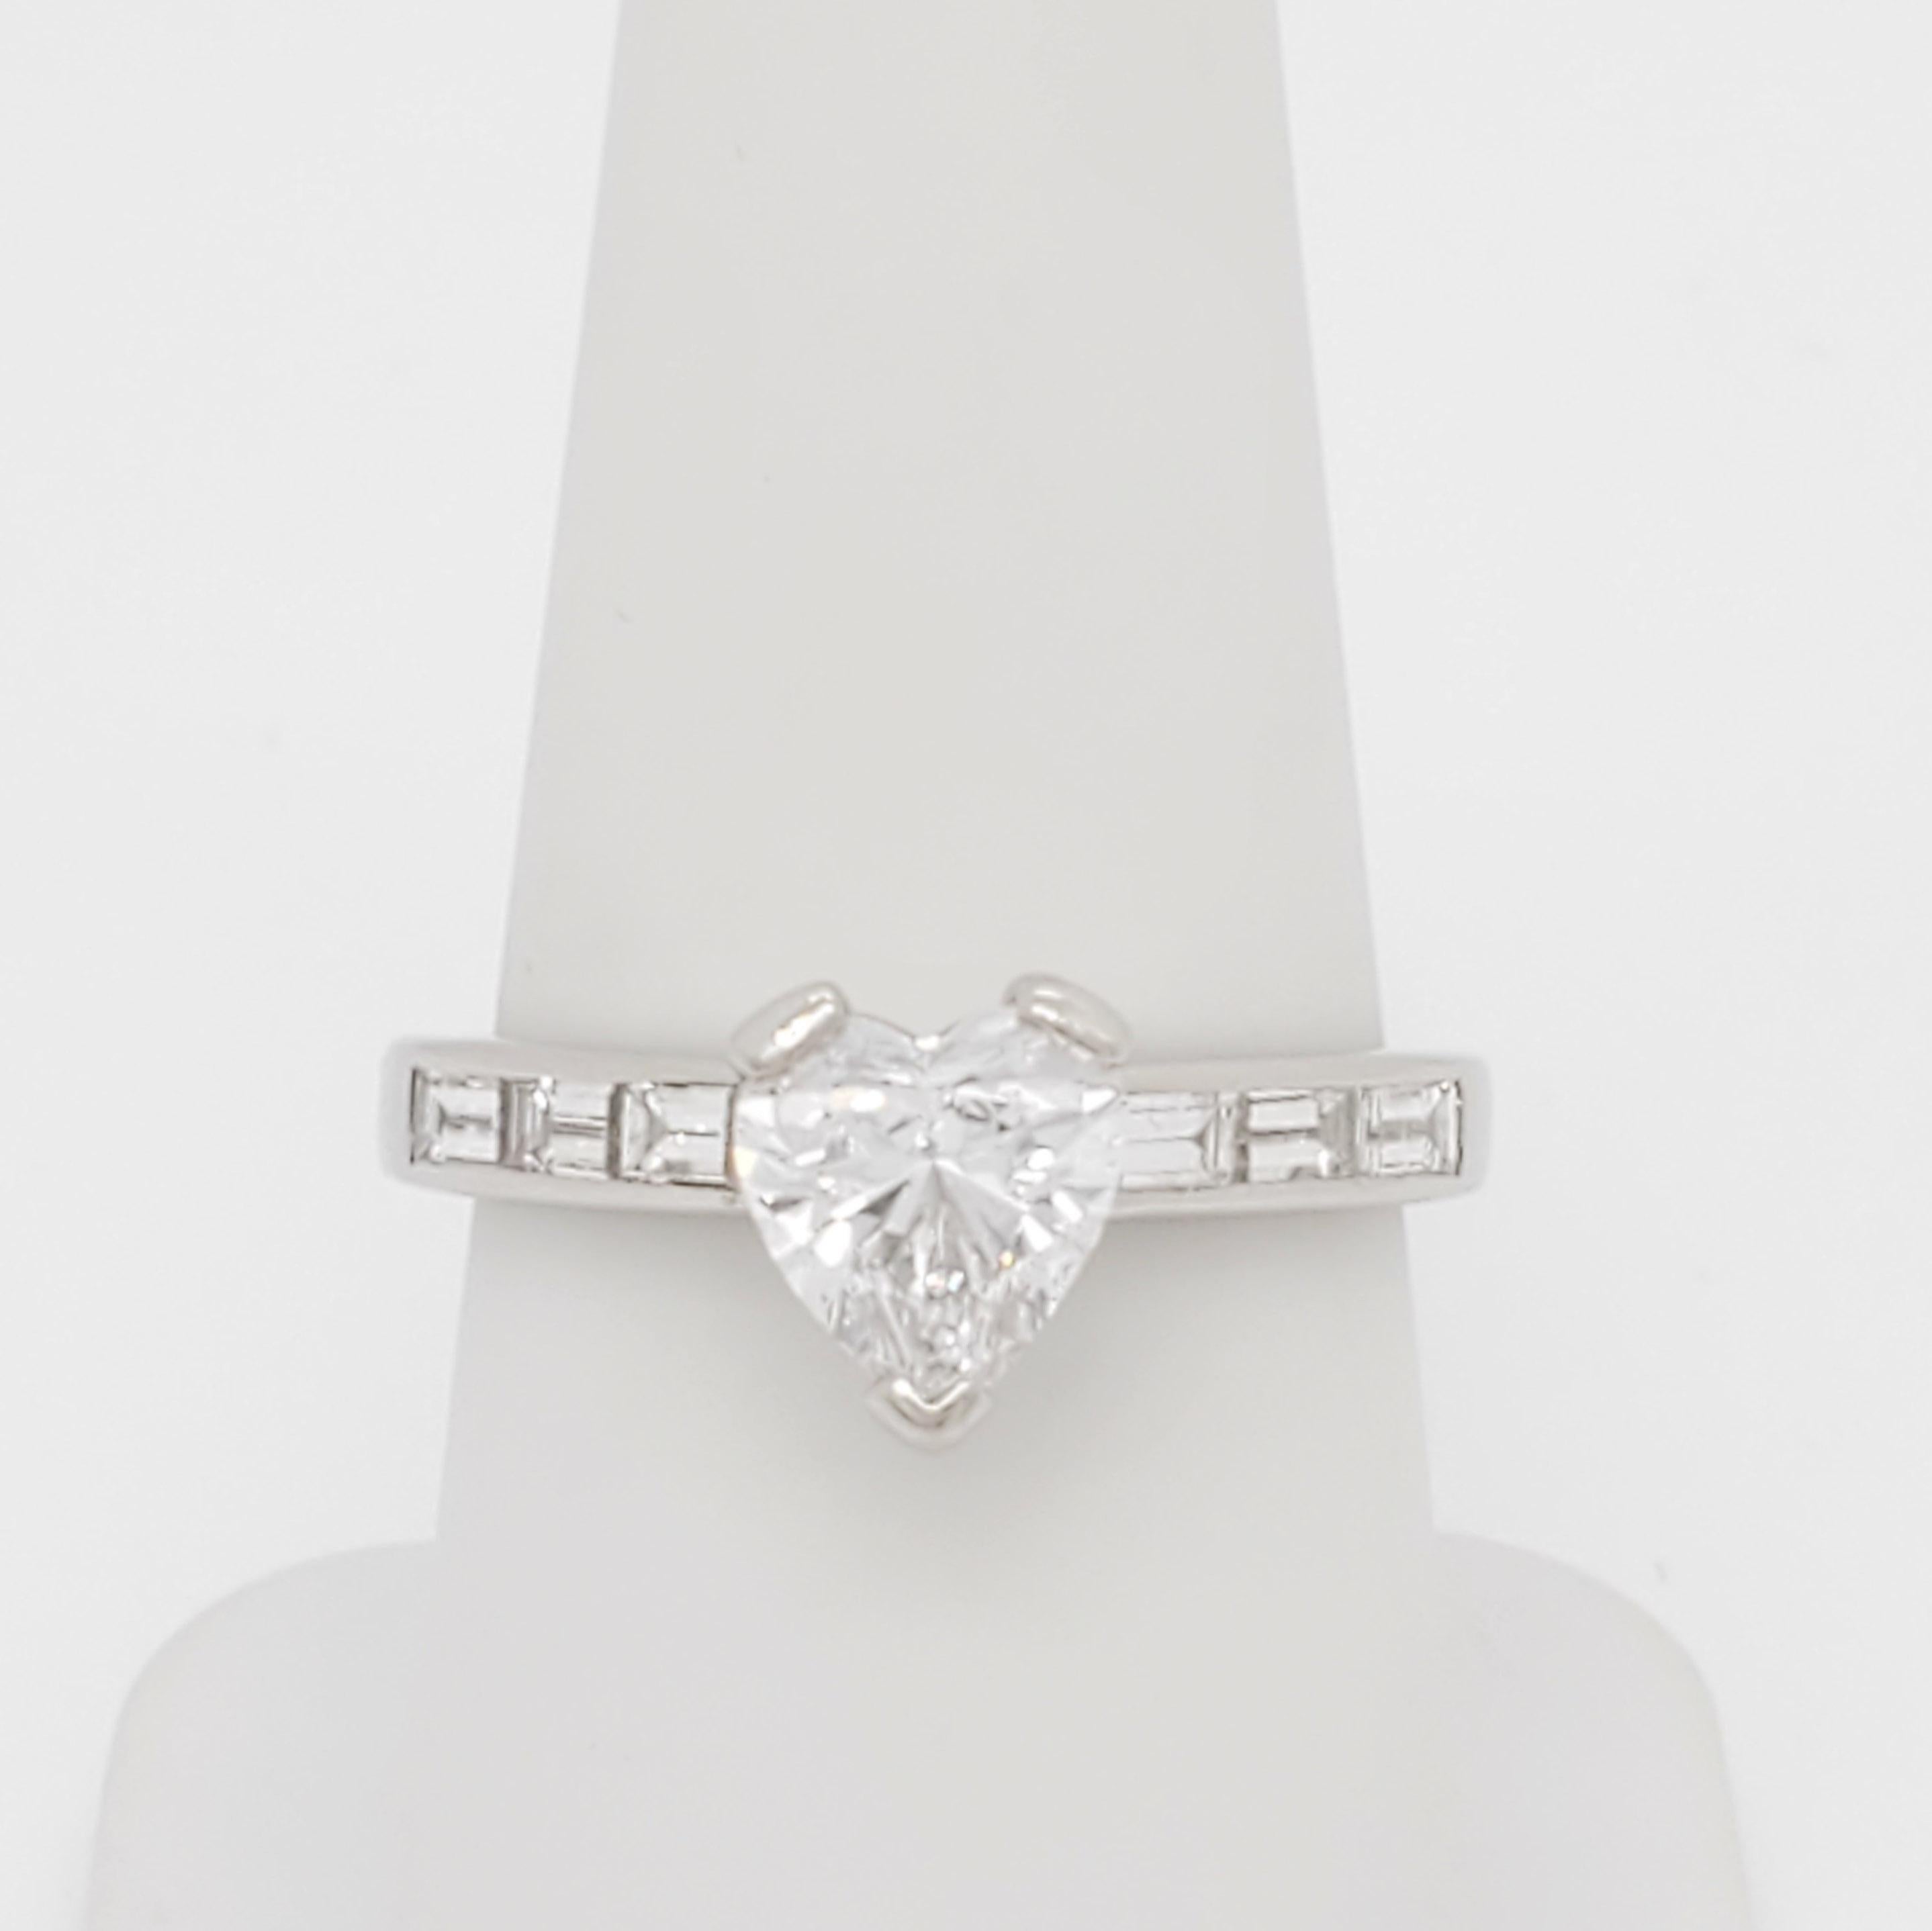 Gorgeous 1.28 ct. GIA diamond heart shape, D SI 1.  The ring has 0.60 ct. good quality white diamond baguettes and is handmade in platinum.  Ring size is 7.  GIA certificate is included.